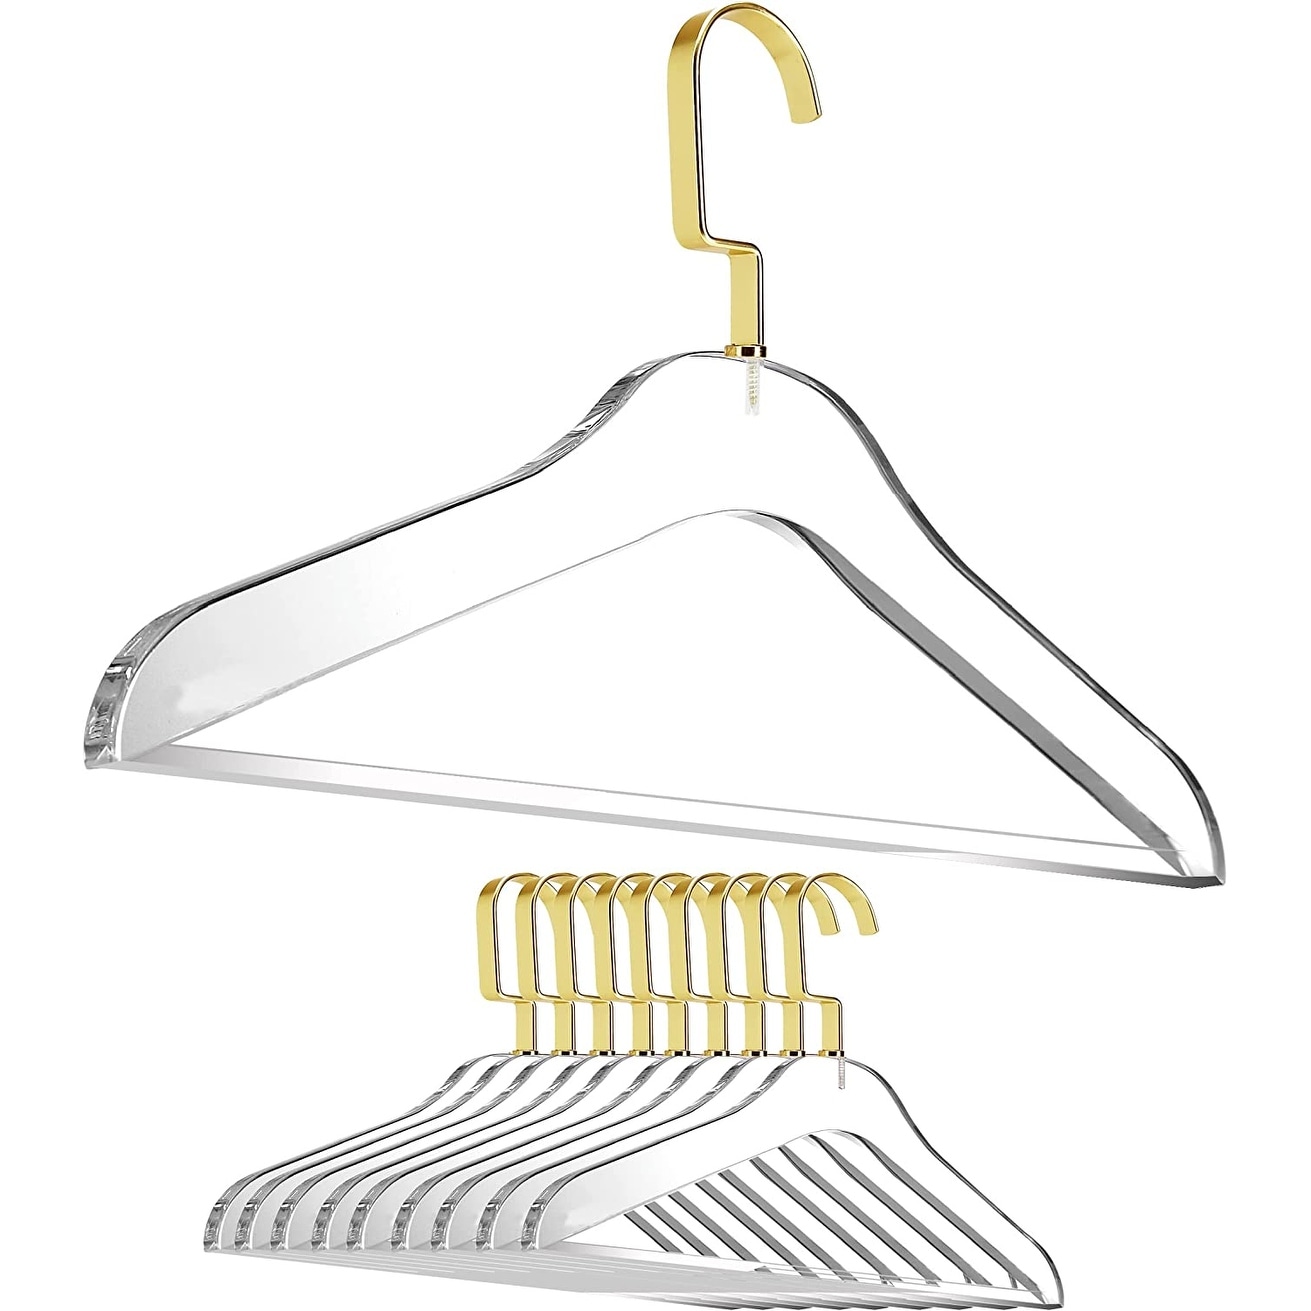 Designstyles Clear Acrylic Clothes Hangers With Pants Bar